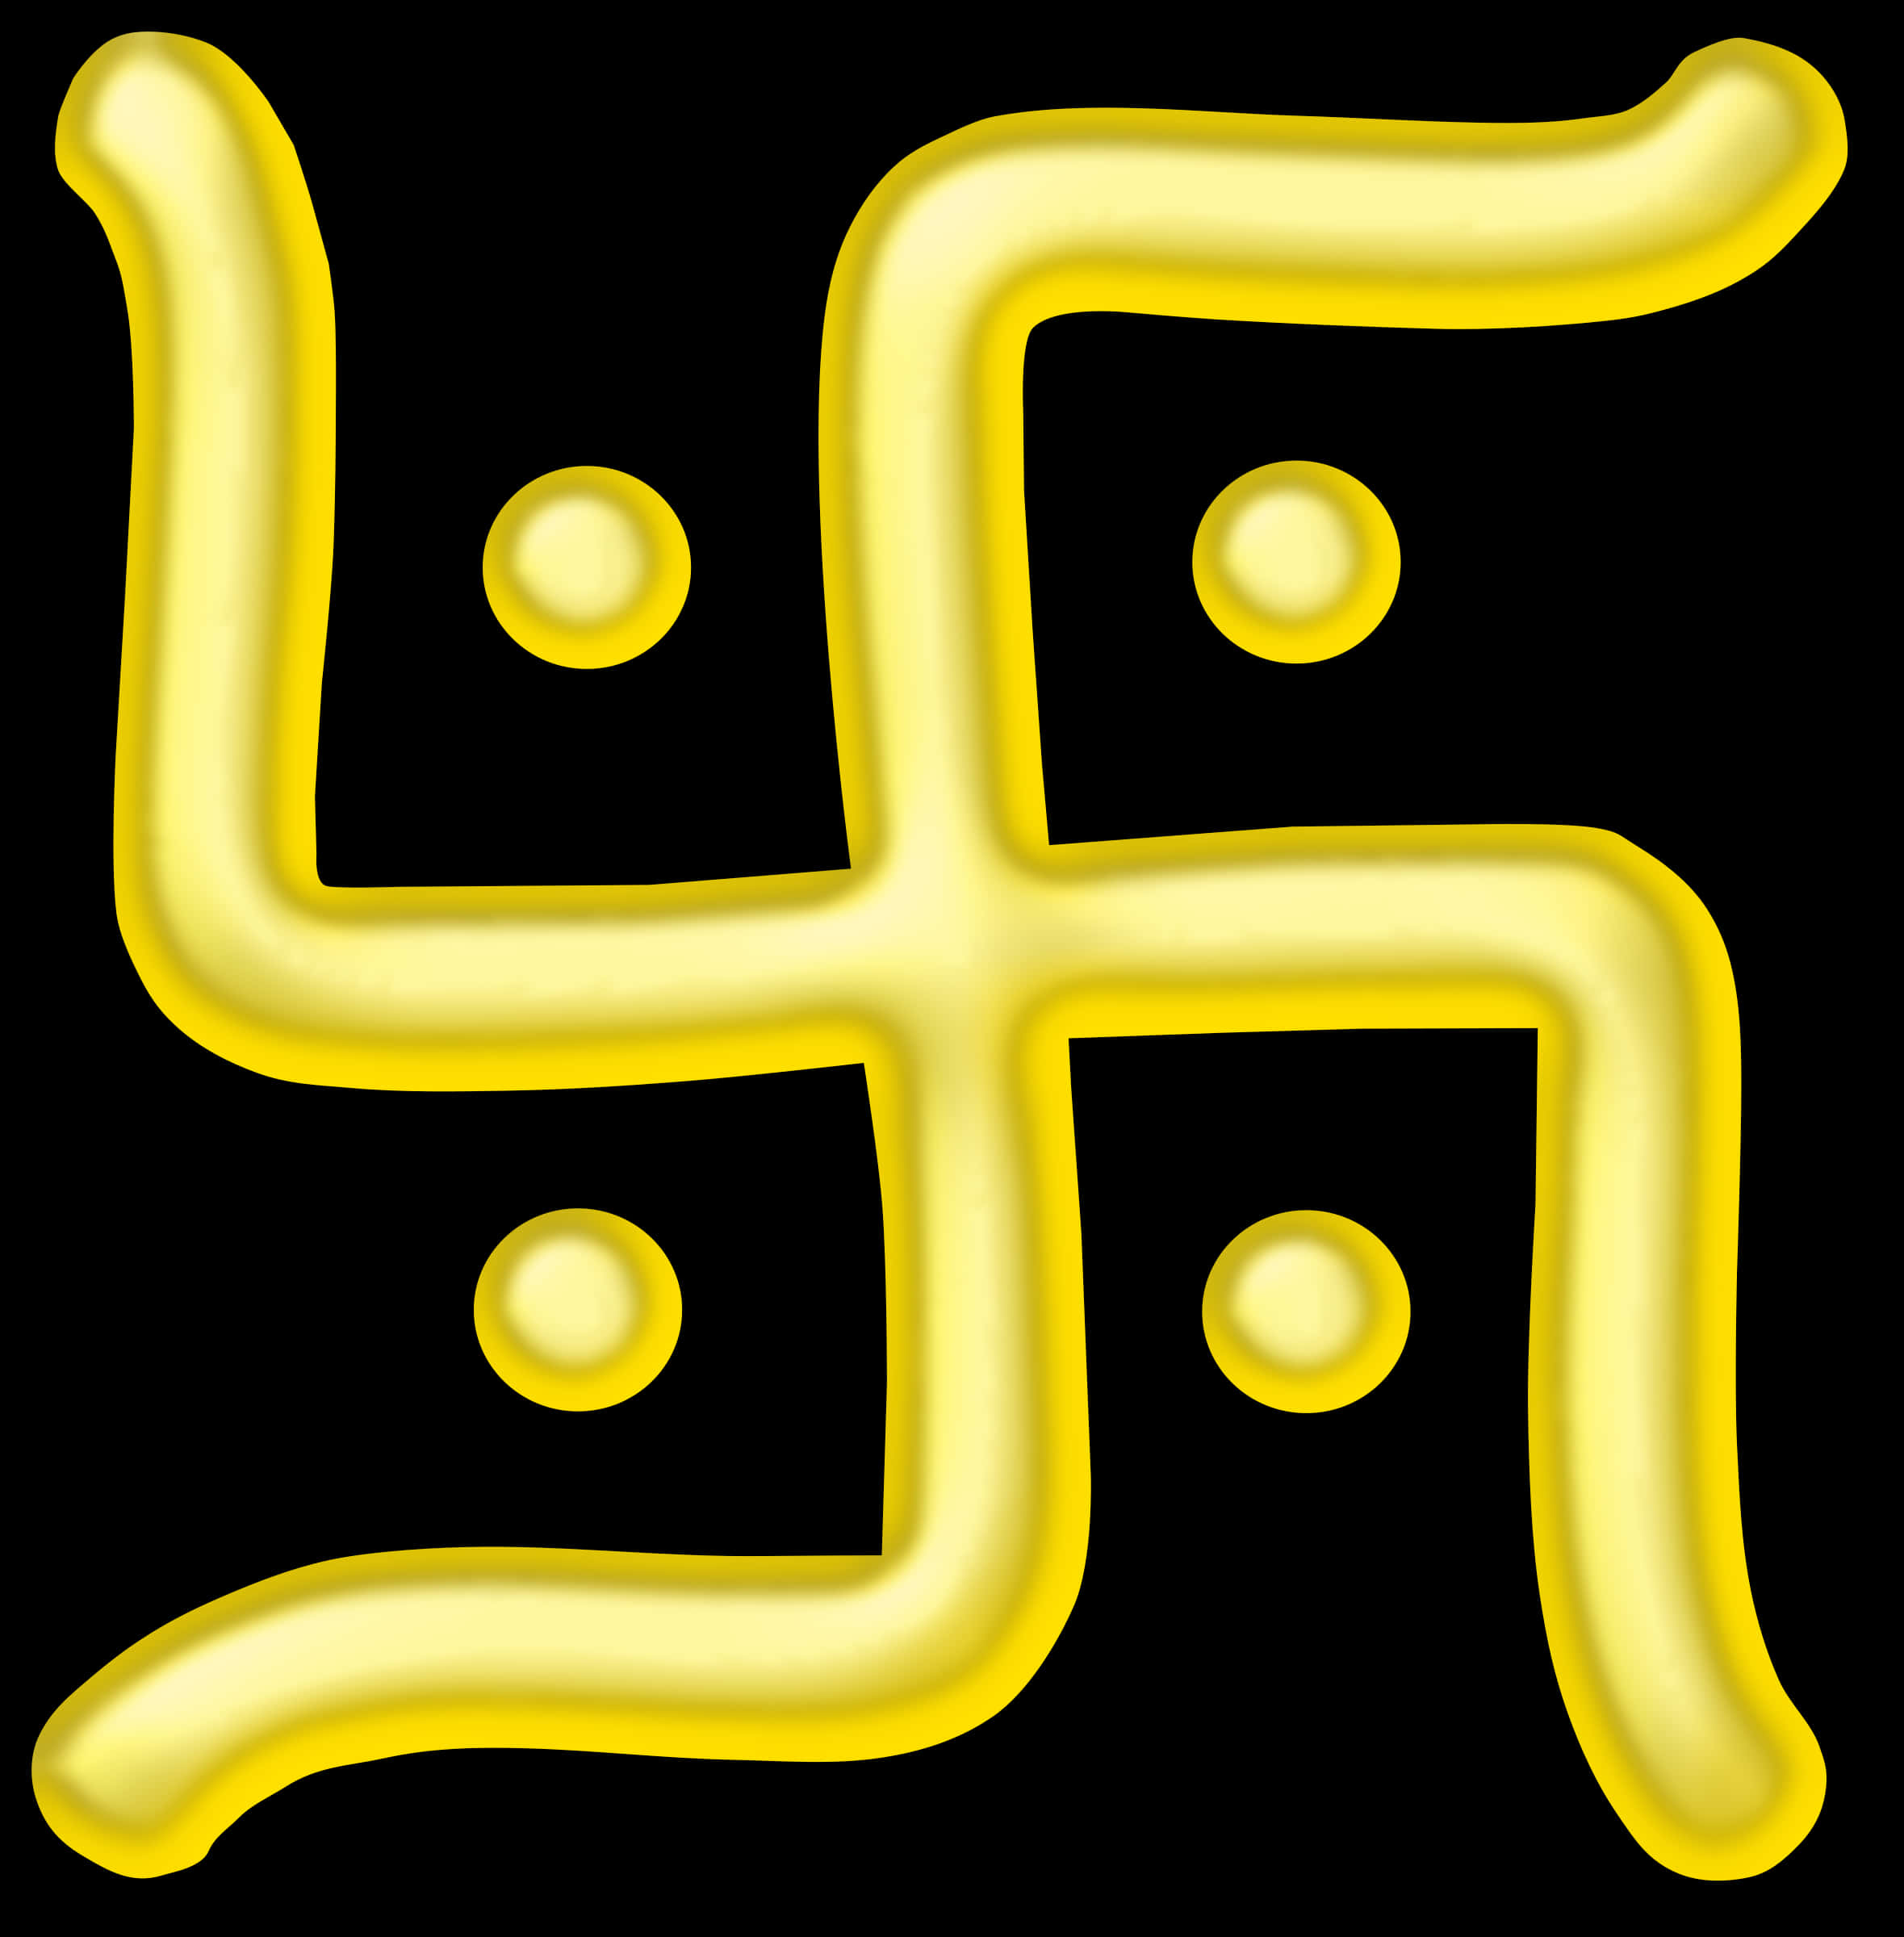 A Yellow Symbol With Dots